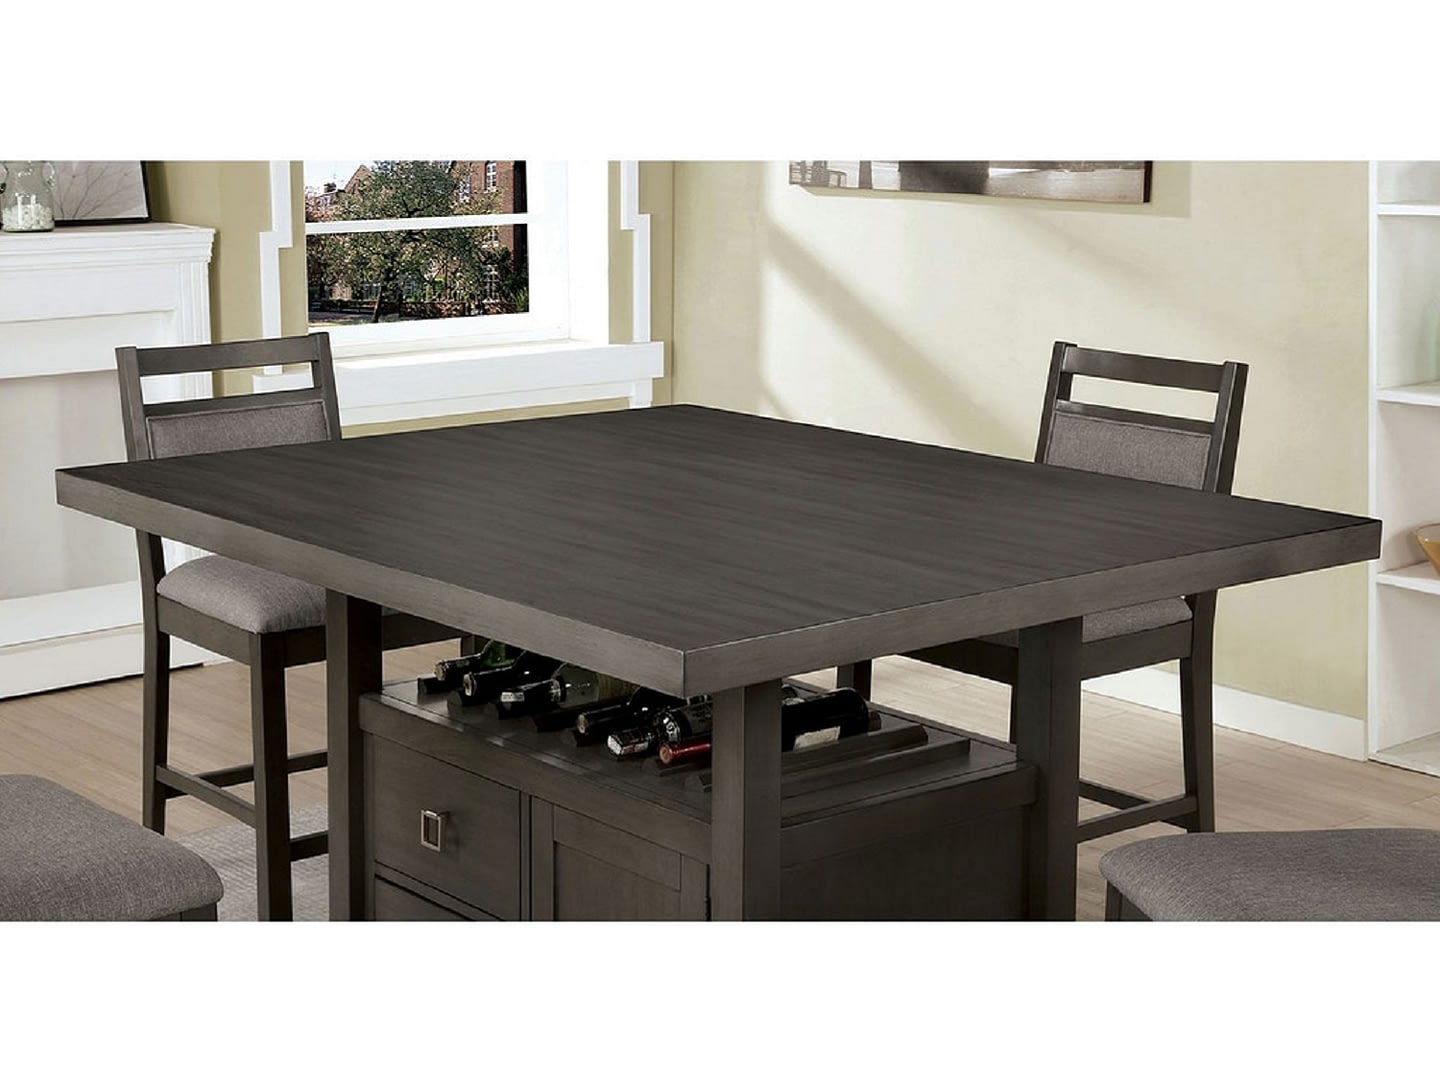 LANDAFF Counter Height Dining Table - Zoom